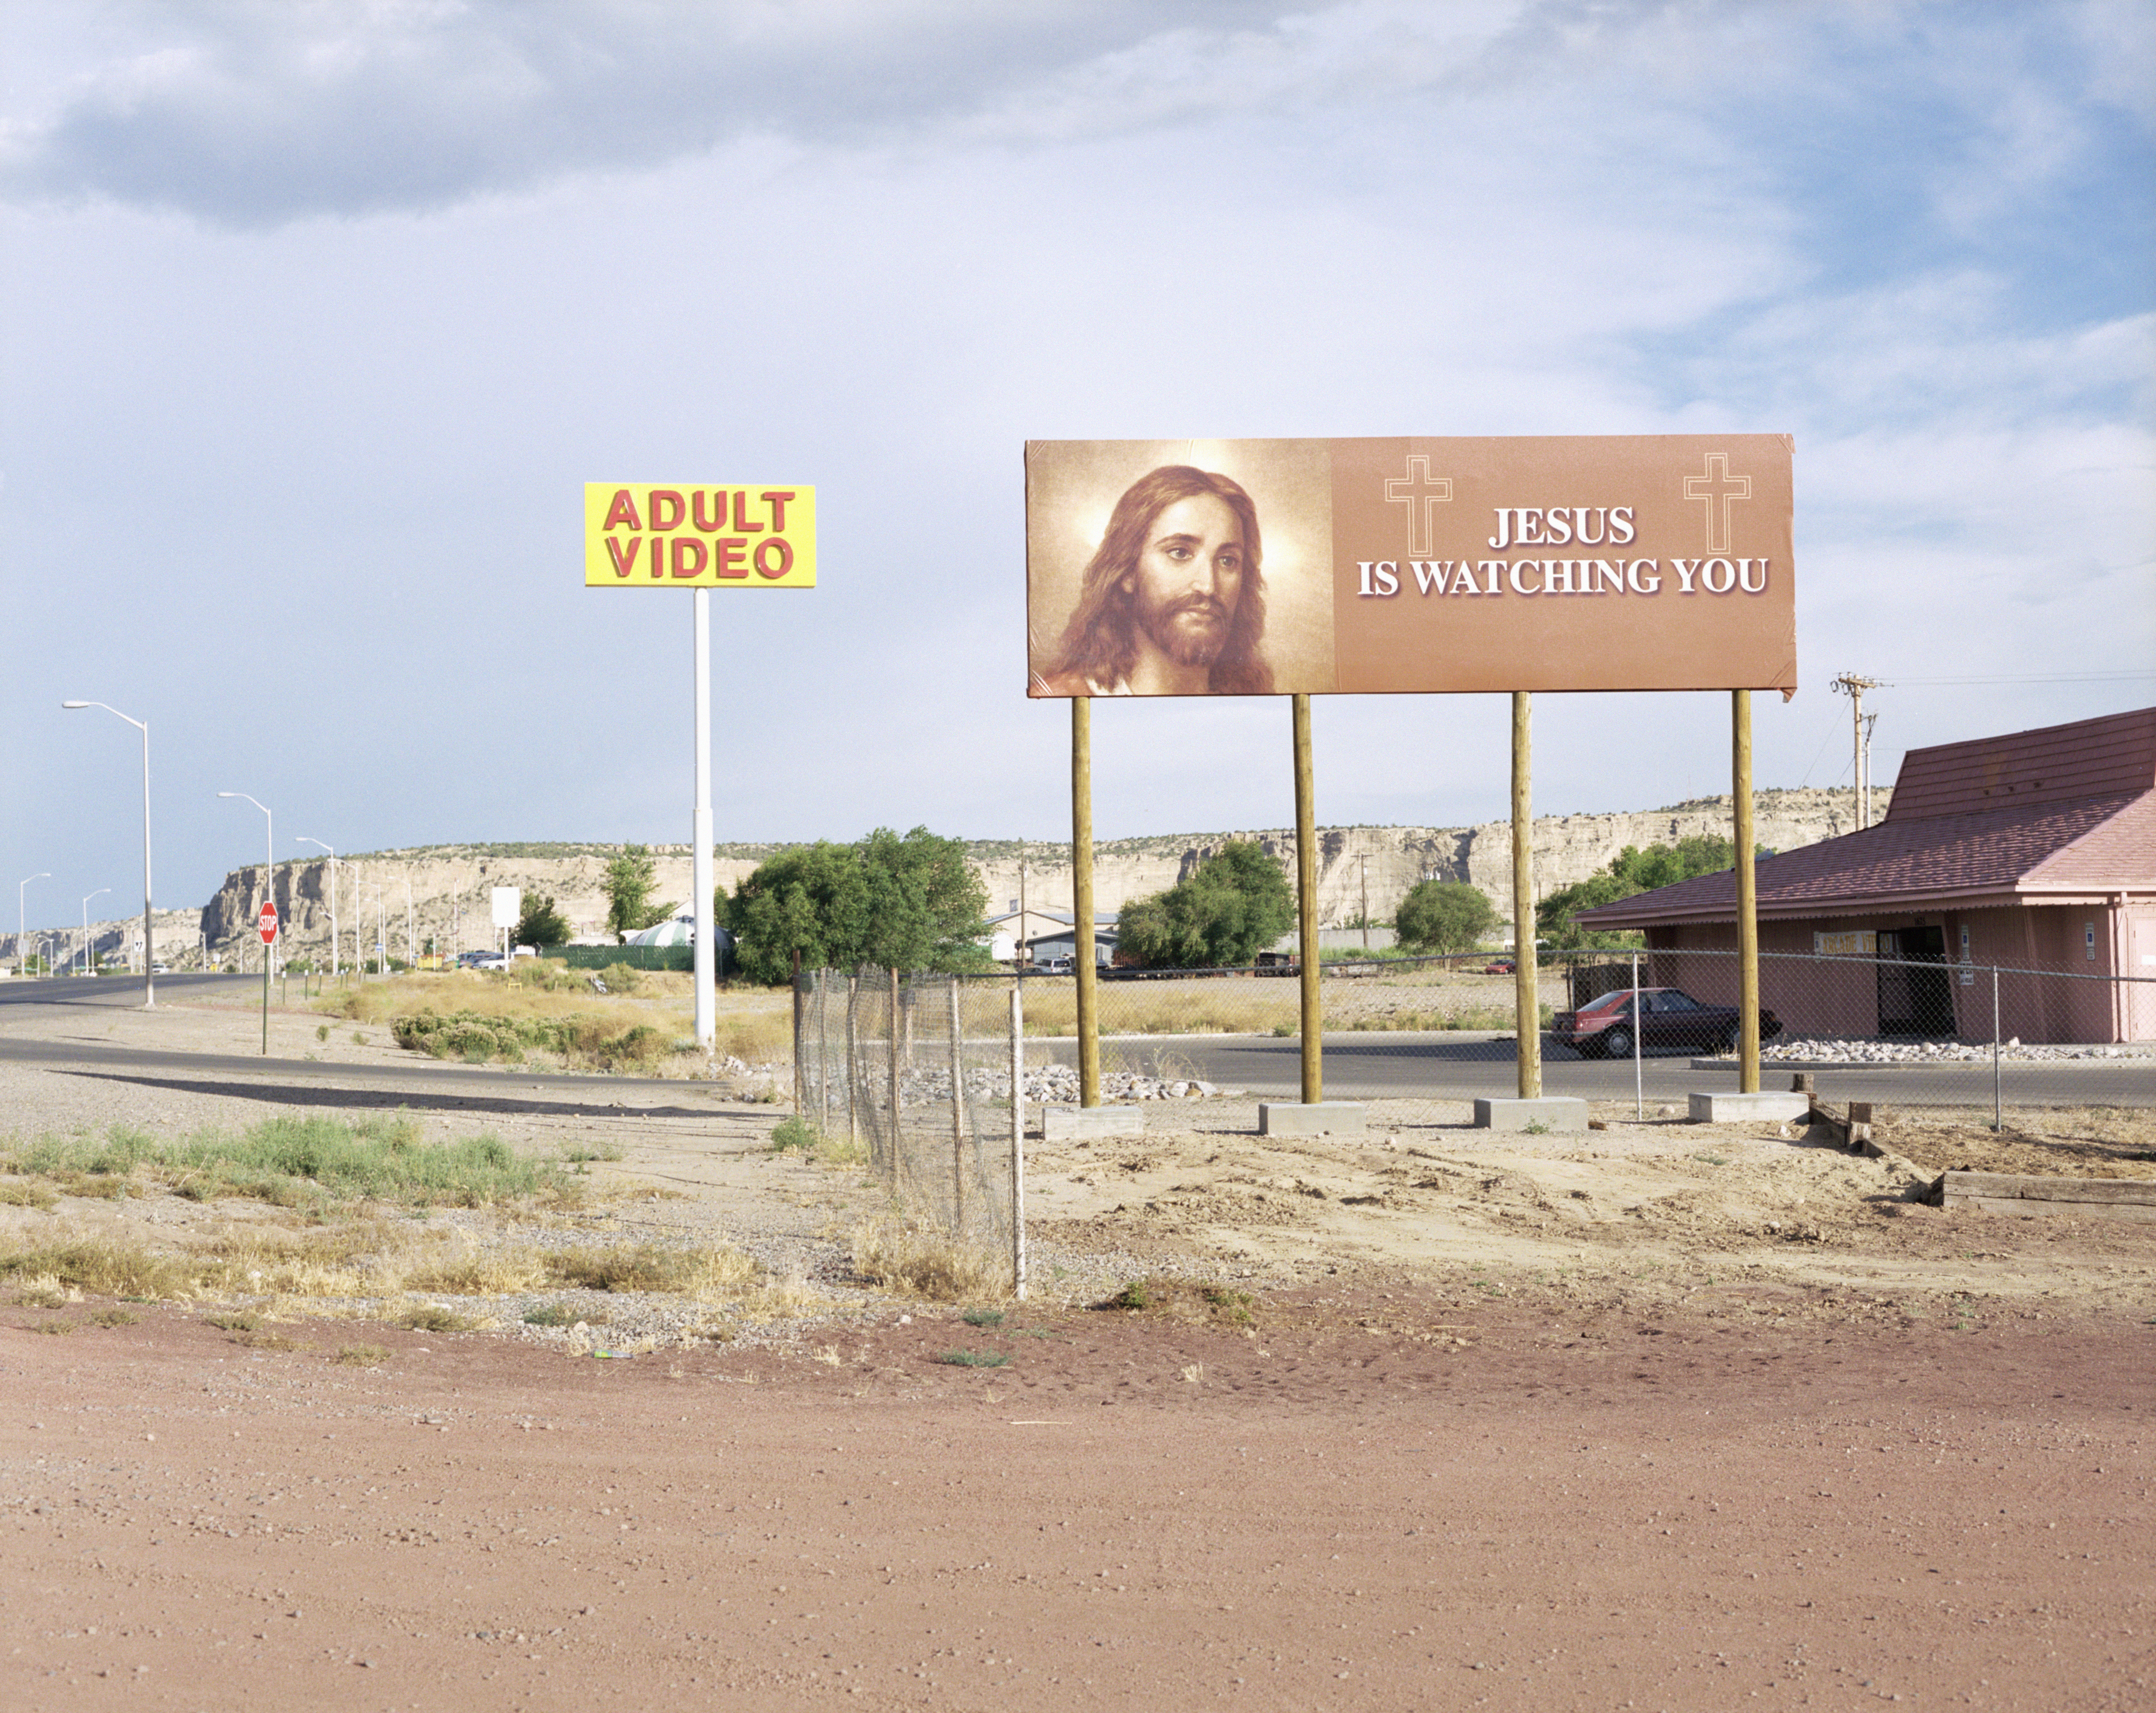 Billboard near an &quot;Adult Video&quot; store displays an image of Jesus with the text &quot;JESUS IS WATCHING YOU&quot;